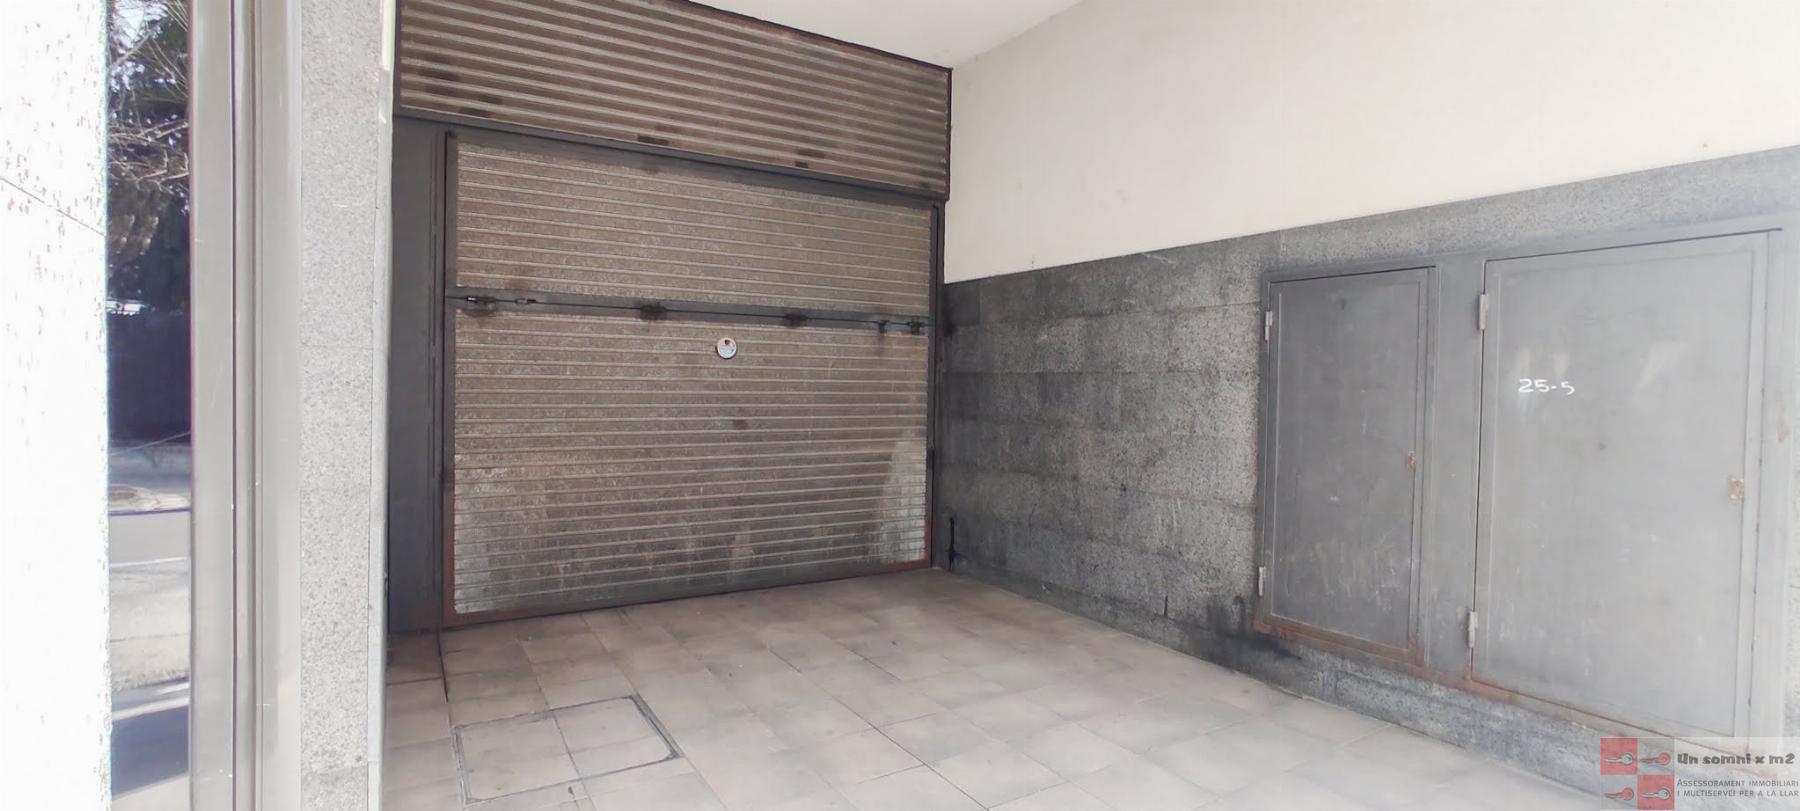 For sale of garage in Piera